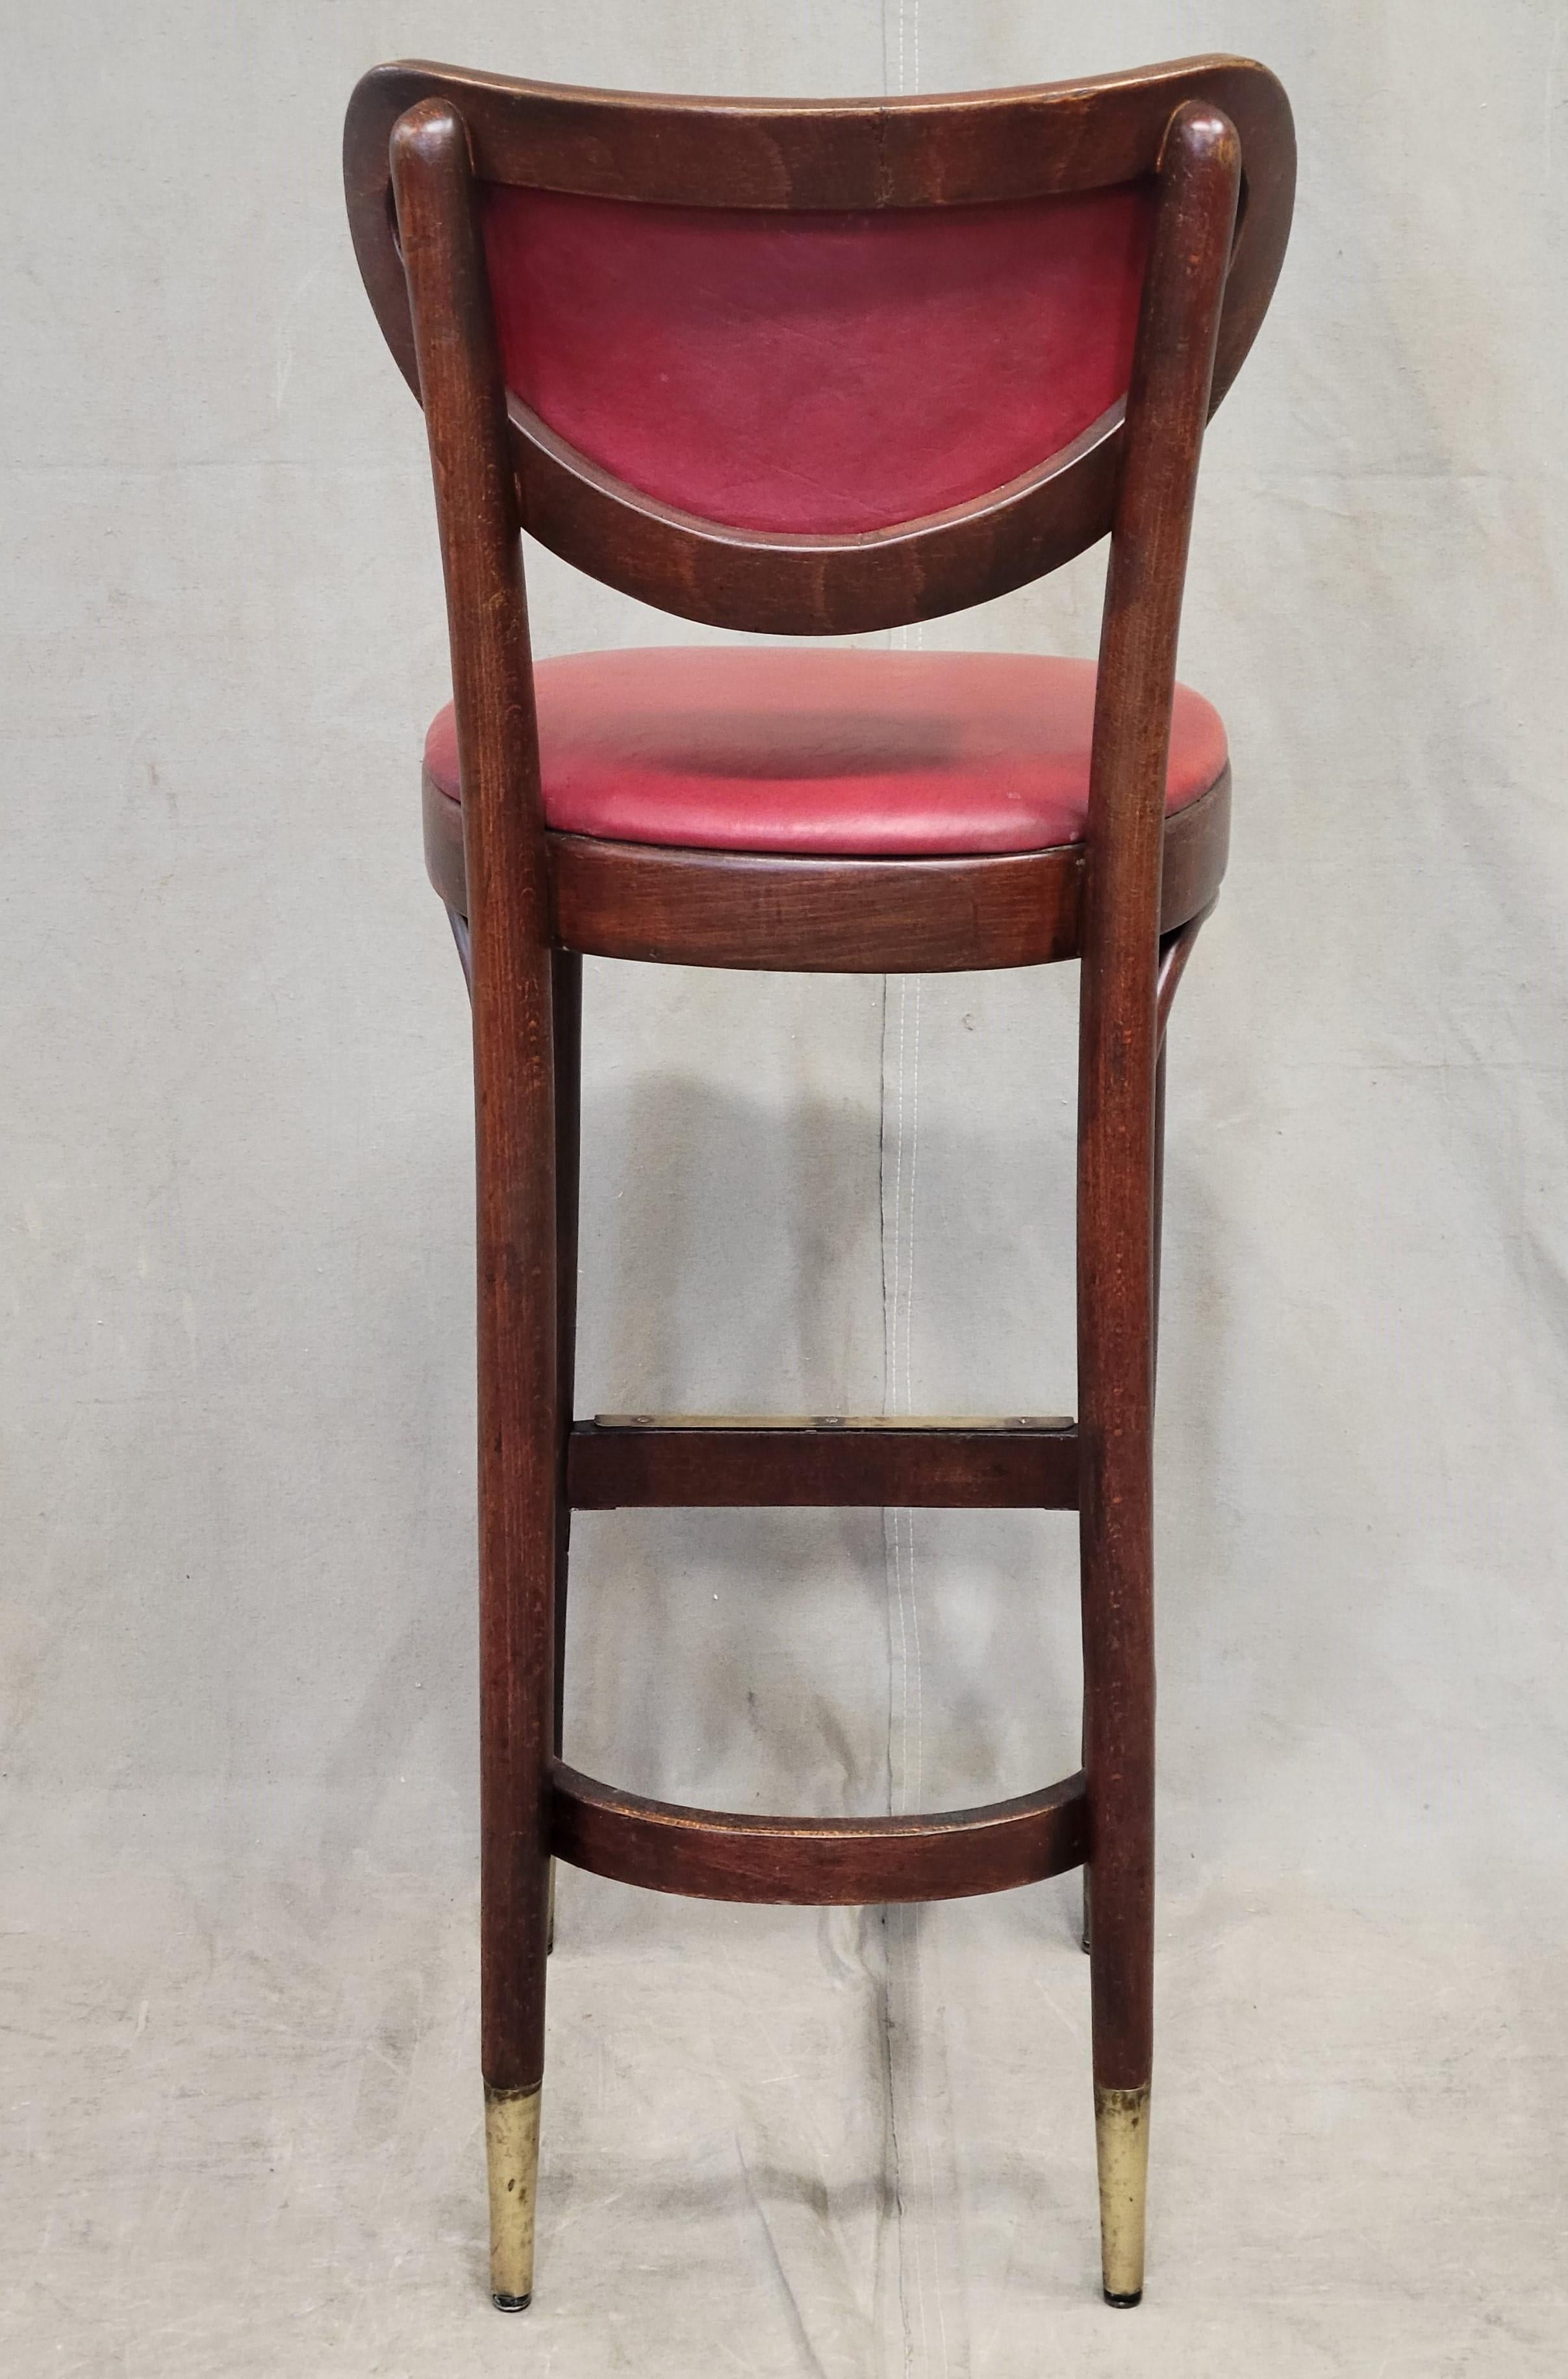 Upholstery Vintage Bentwood Bar Stools with Original Ruby Red Vinyl and Brass Accents